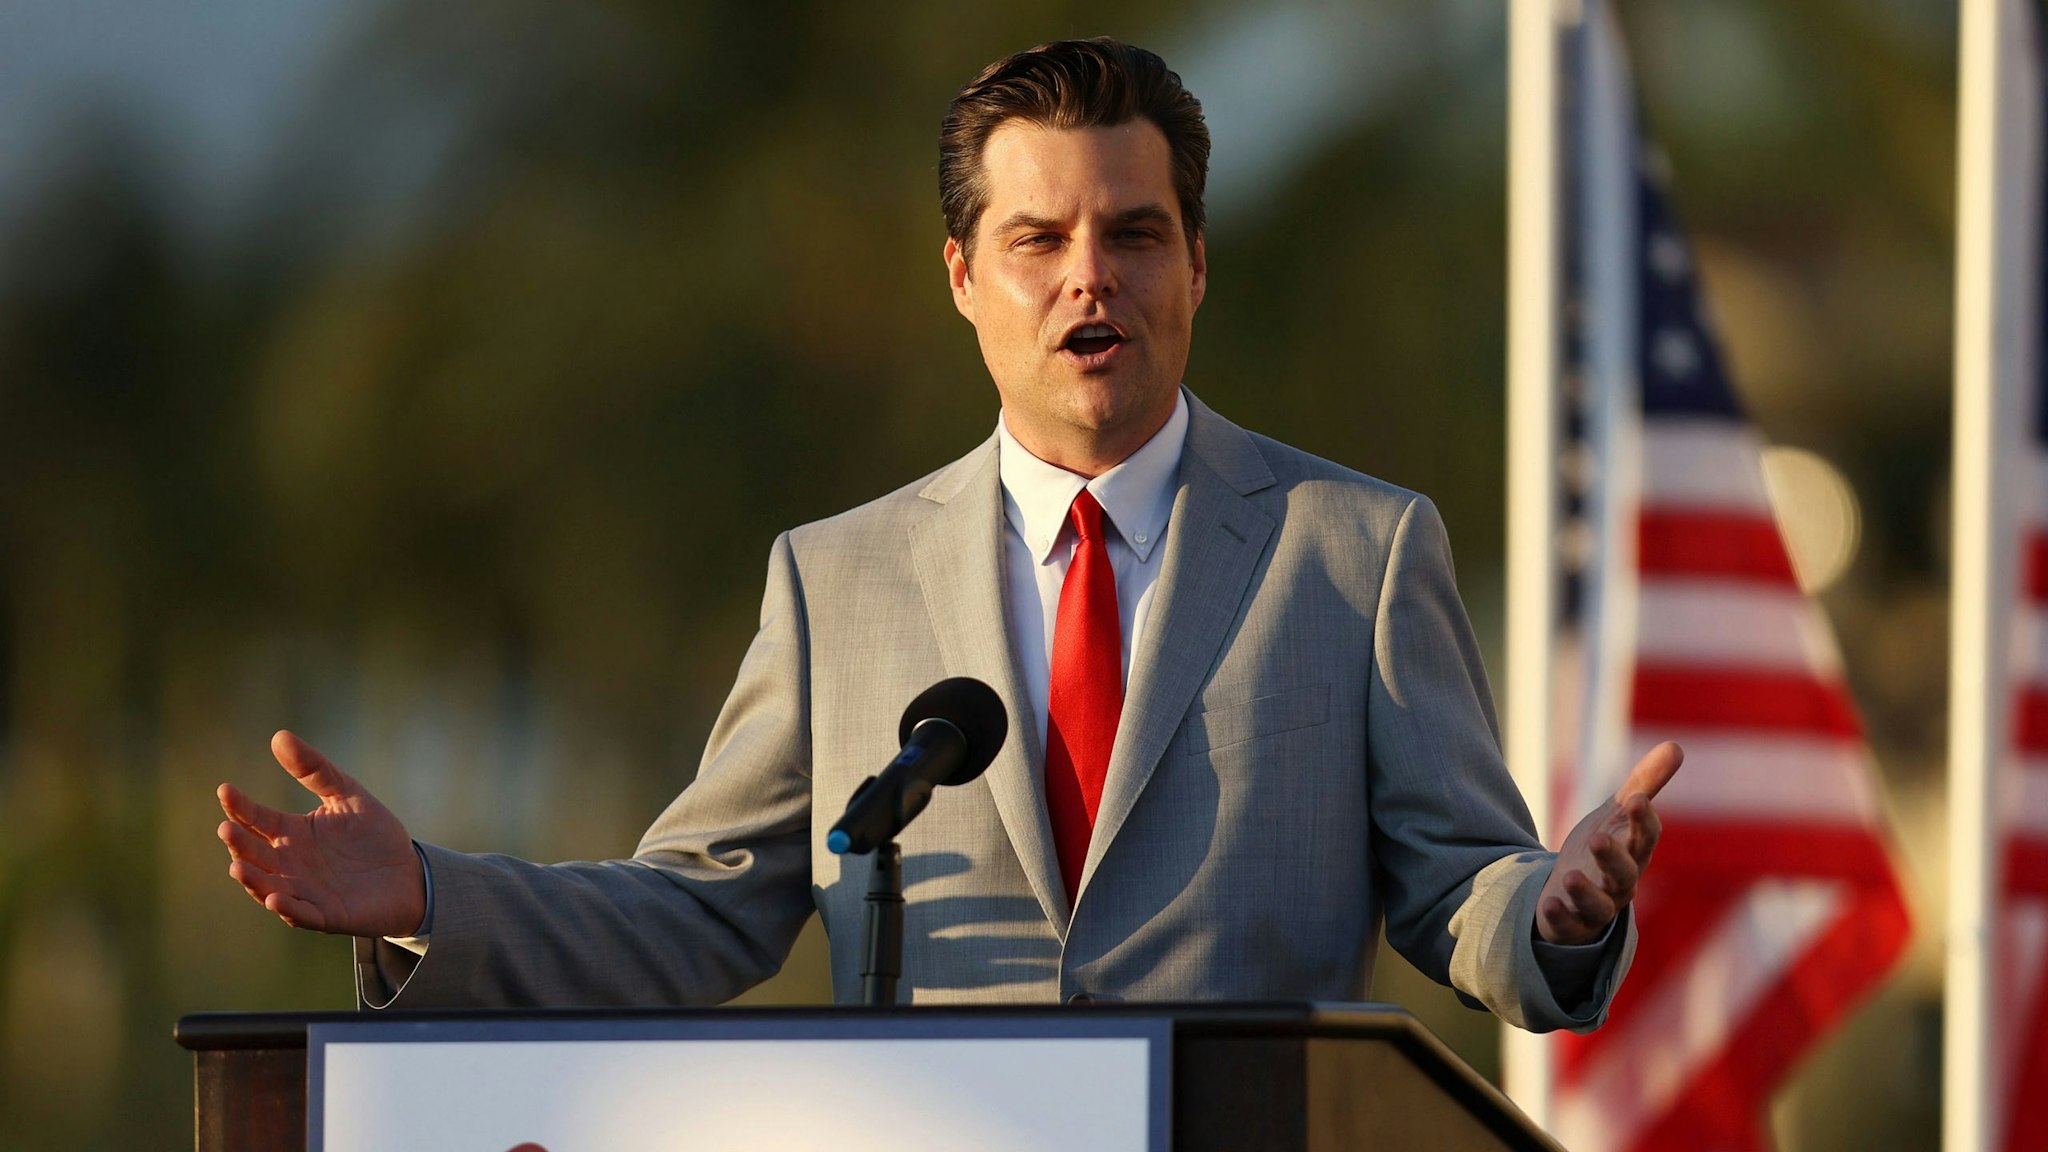 DORAL, FLORIDA - APRIL 09: Rep. Matt Gaetz (R-Fl) speaks during the "Save America Summit" at the Trump National Doral golf resort on April 09, 2021 in Doral, Florida. Mr. Gaetz addressed the summit hosted by Women for America First as the Justice Department is investigating the Congressman for allegations of sex with a minor and child sex trafficking.